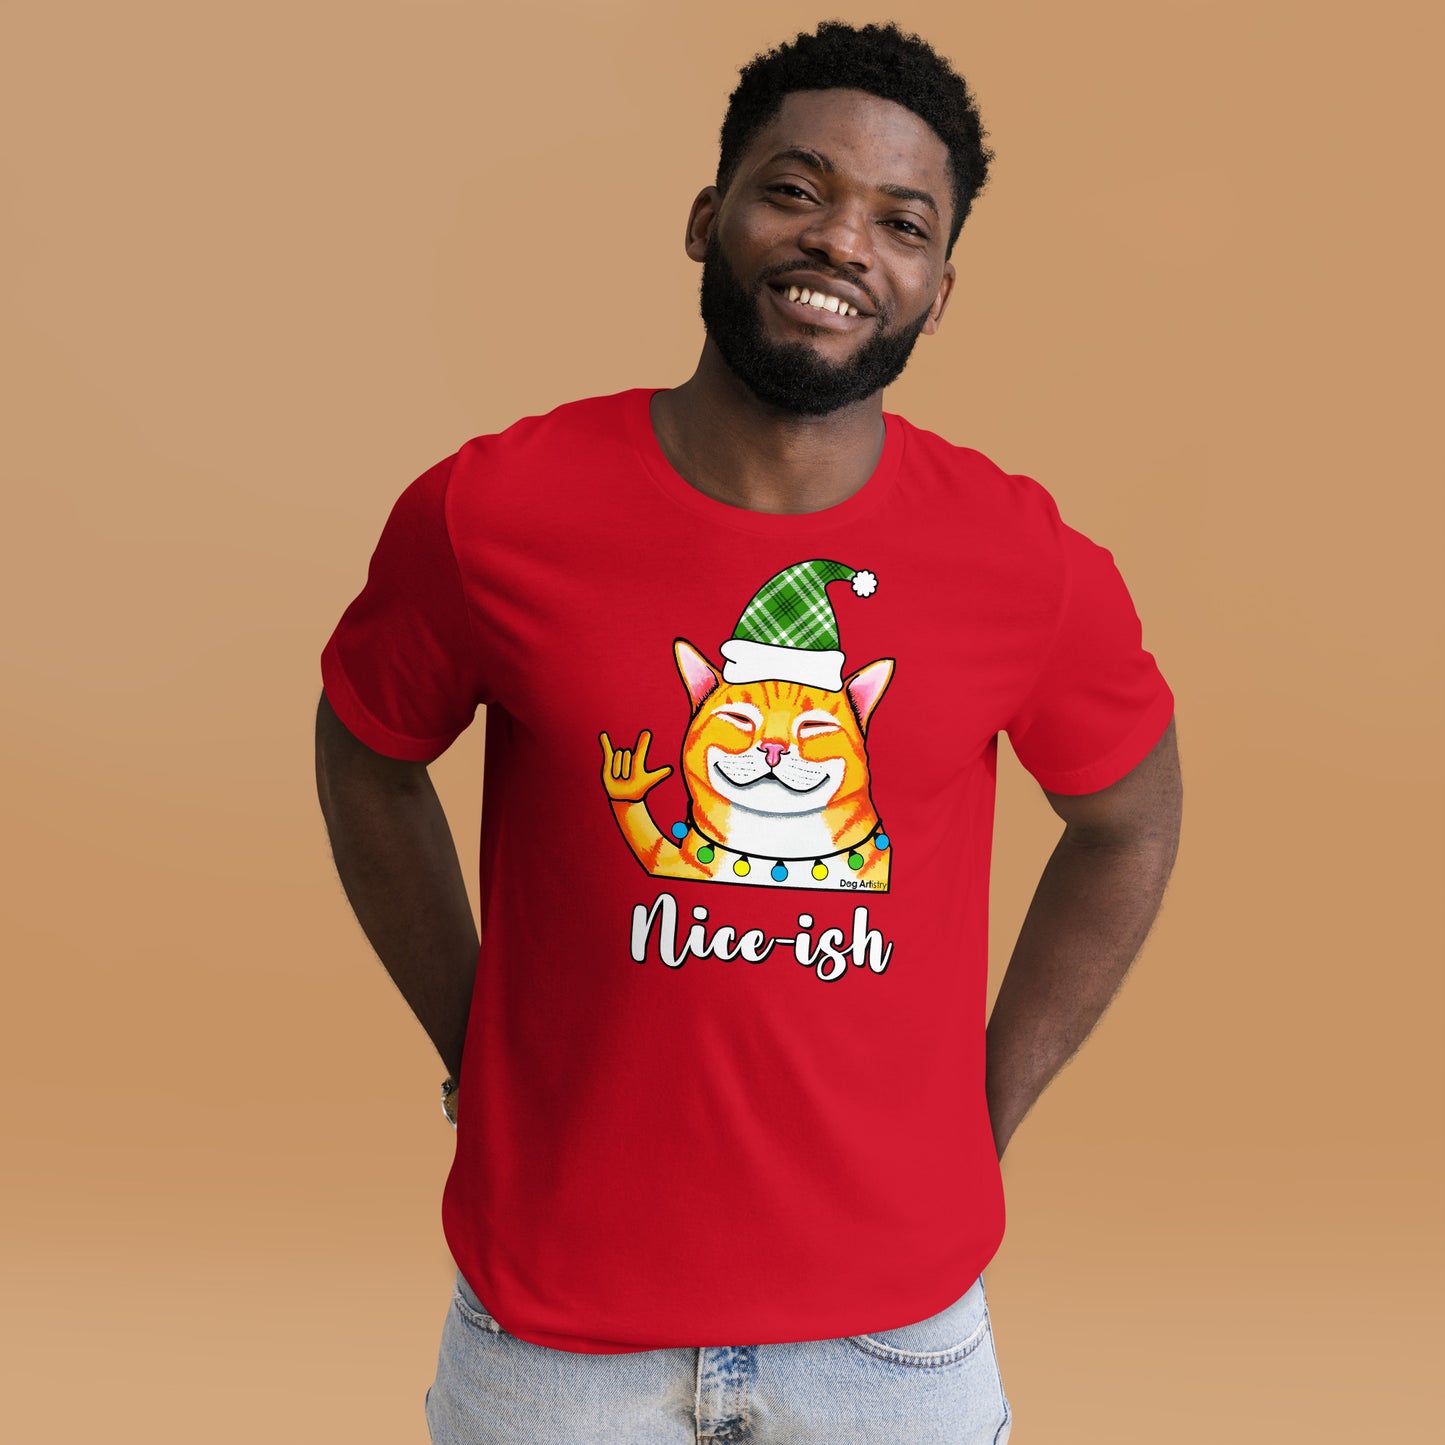 Nice-ish Cat unisex t-shirt red by Dog Artistry.